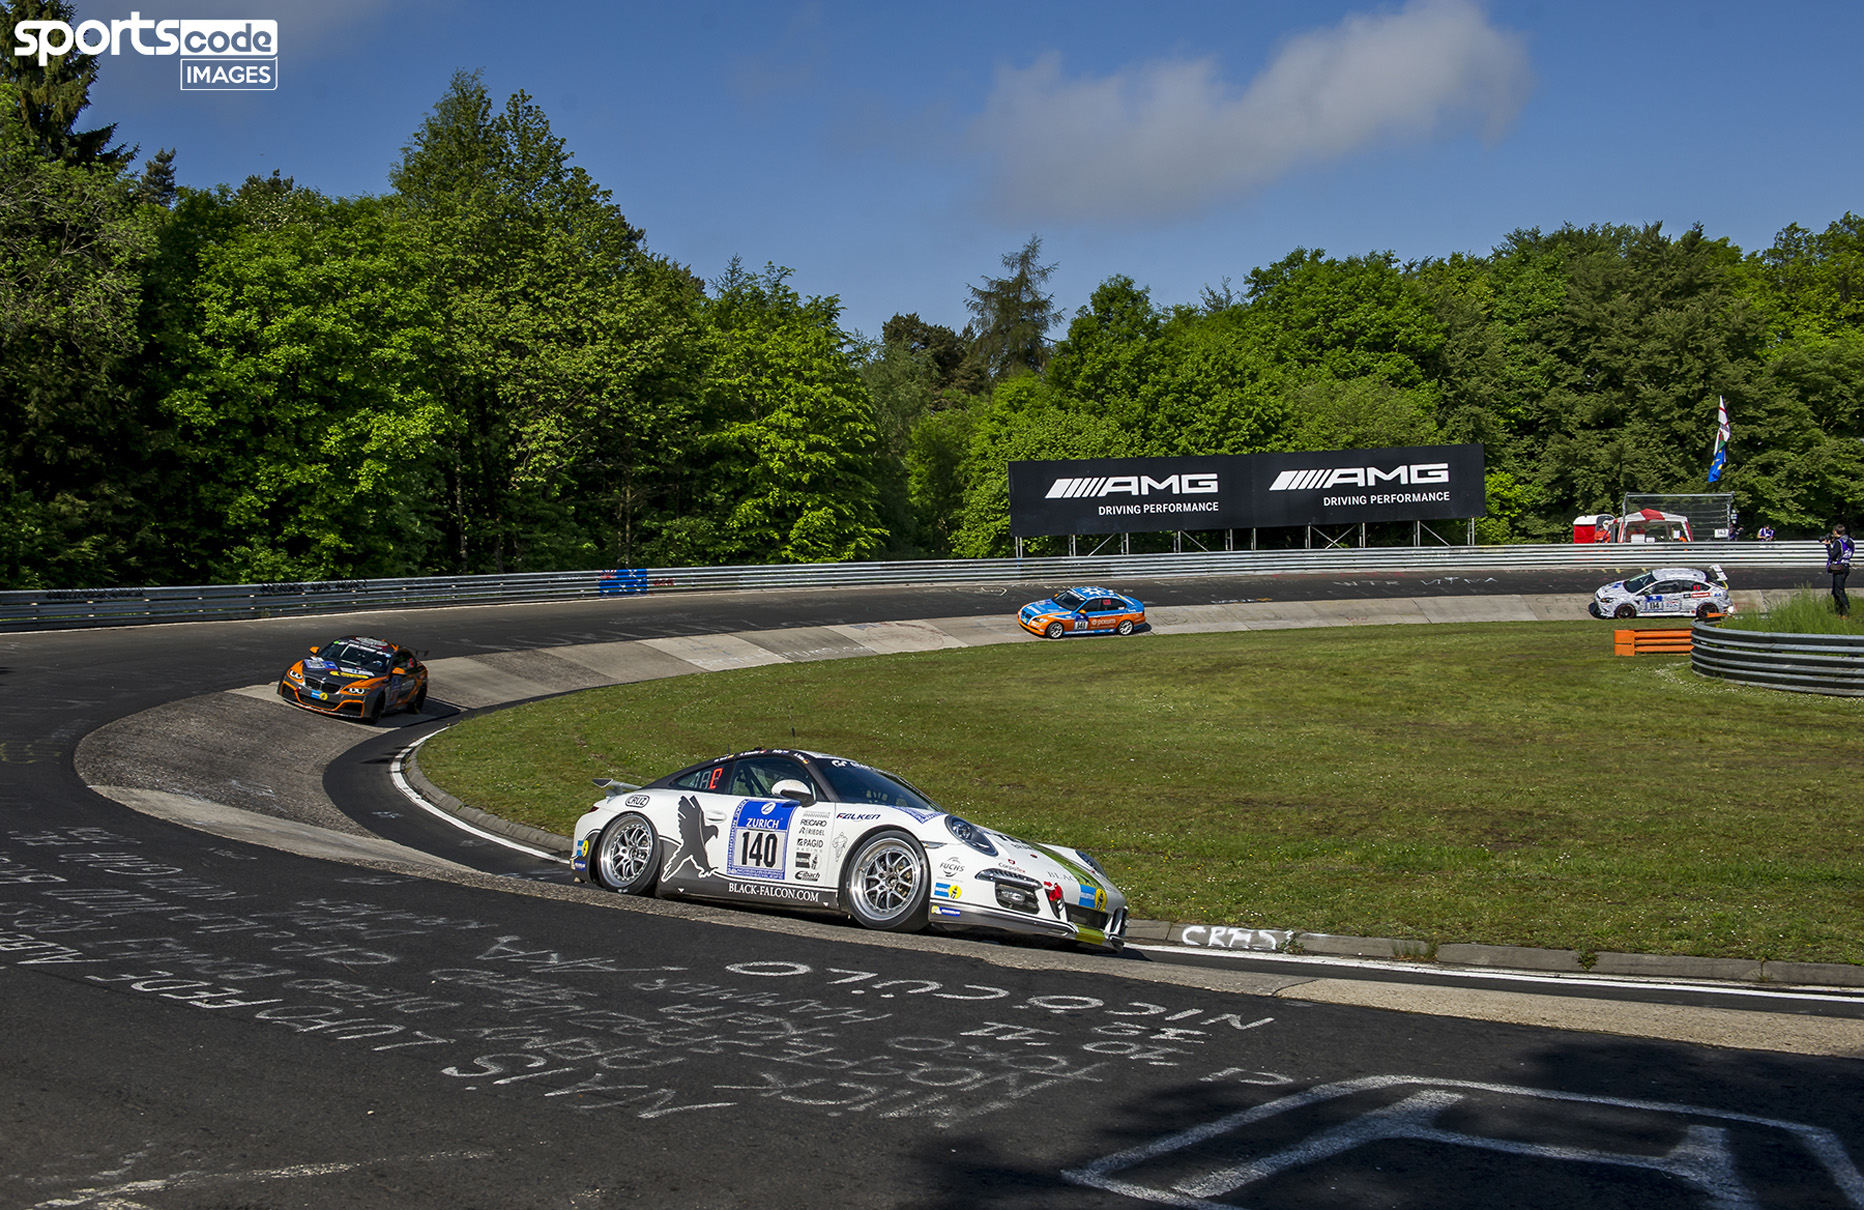 Victory for Miguel Toril at the 24 hours of Nürburgring